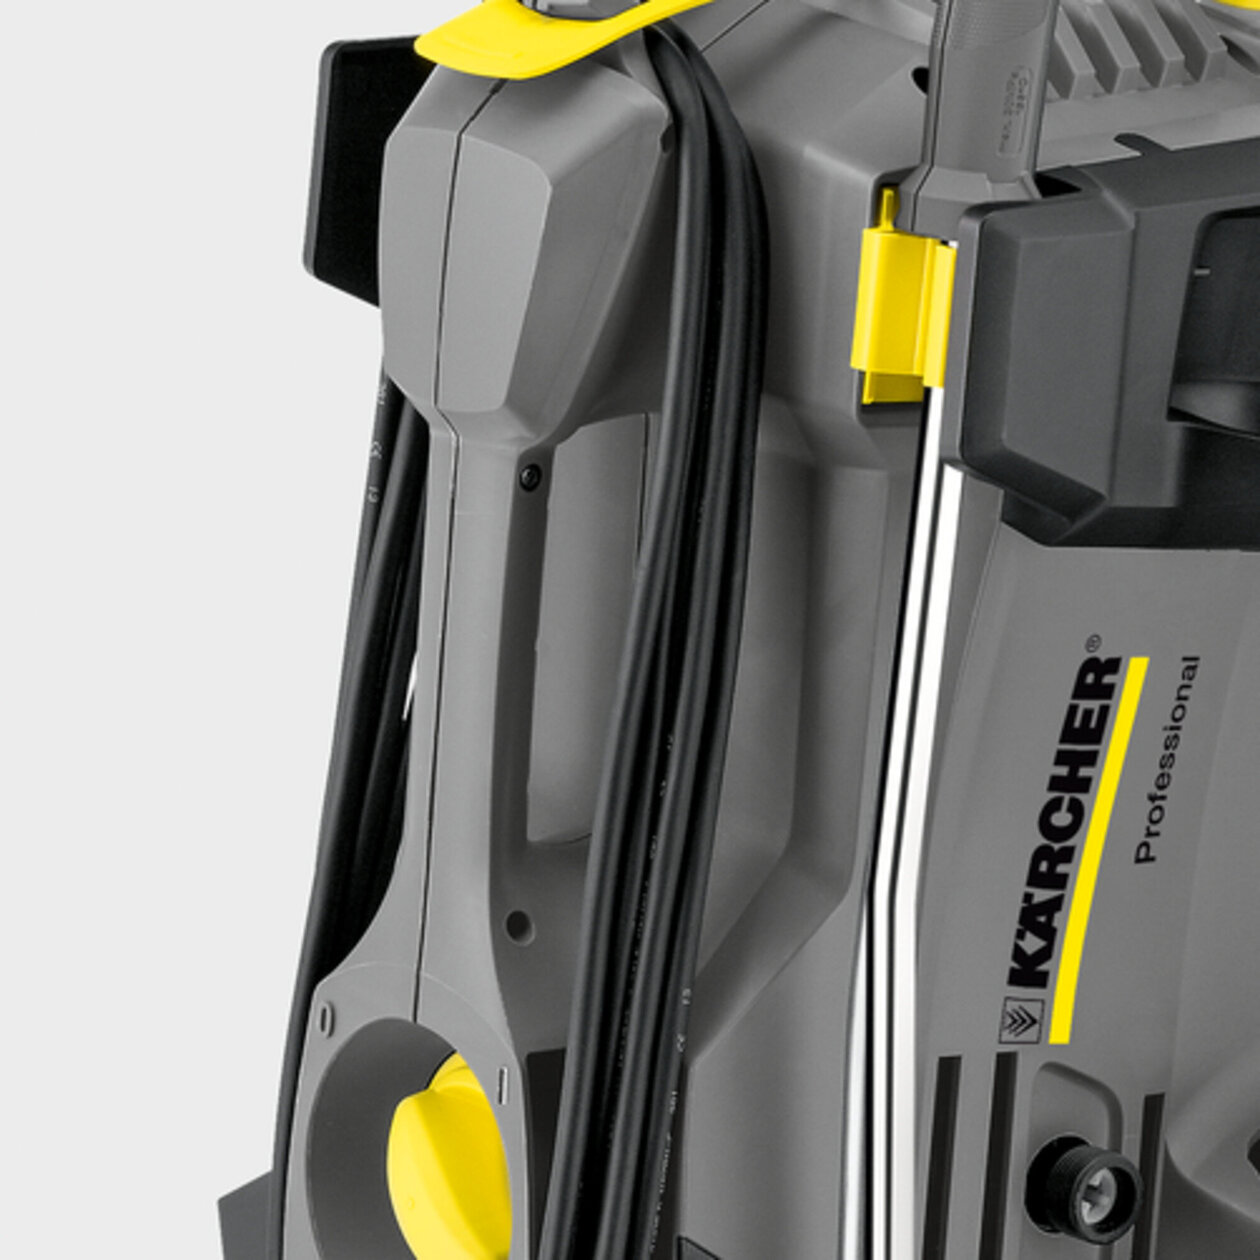 High Pressure Cleaner HD 5/11 P 240V: First-class mobility